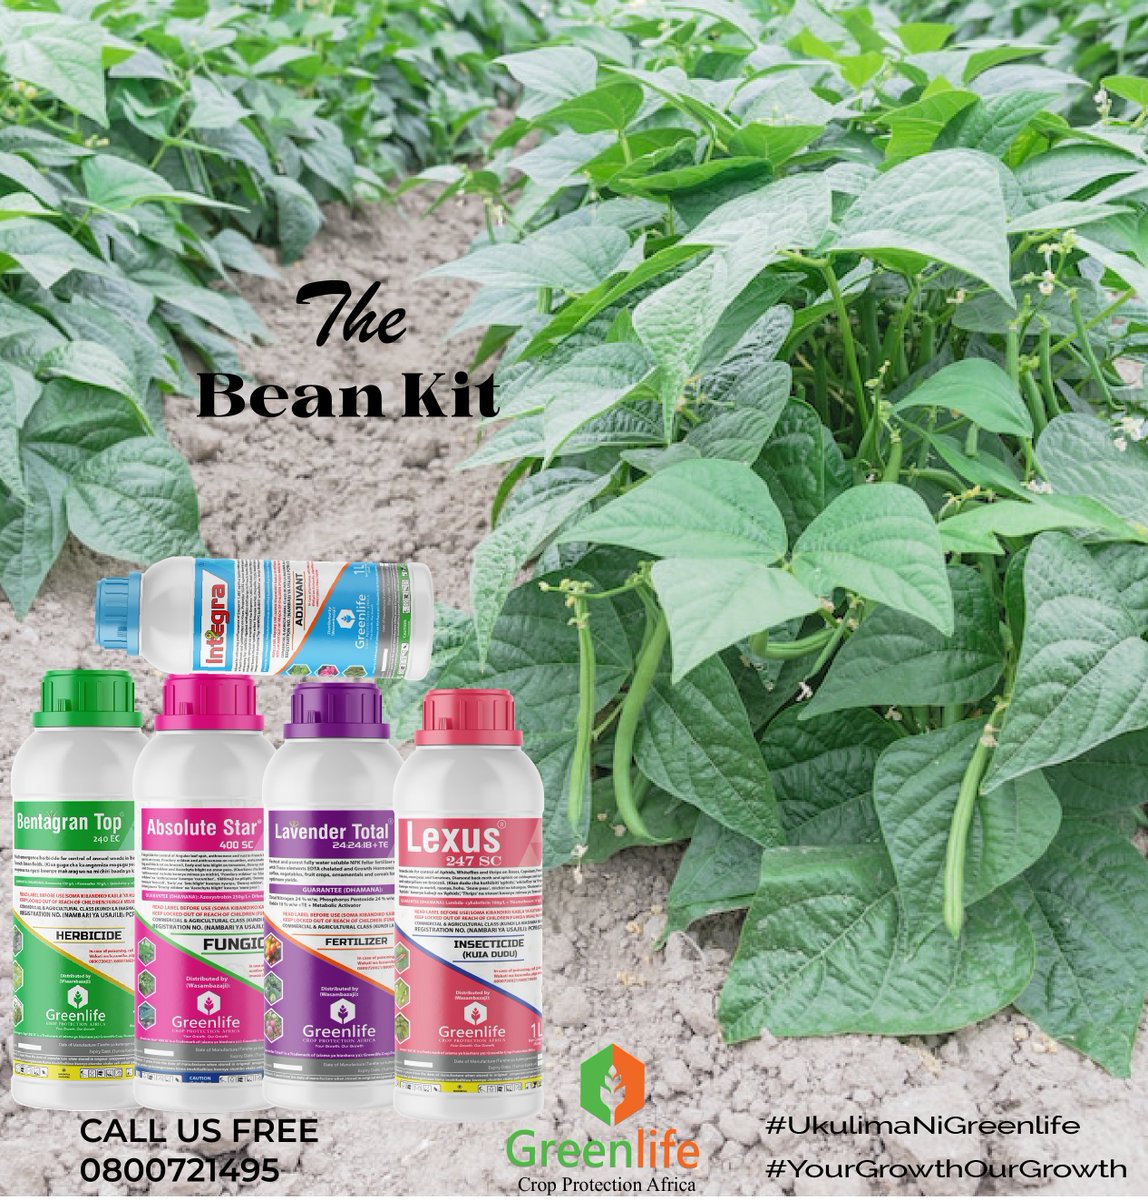 THE BEAN KIT📷📷📷 This is a MUST-have for every farmer who has planted beans or Green grams. 📷 Bentagran Top 240 EC 📷 Absolute Star 400 EC 📷 Lavender Total ~ 📷 Lexus 247 SC #ShambaShwari #UkulimaNiGreenlife #YourGrowthOurGrowth